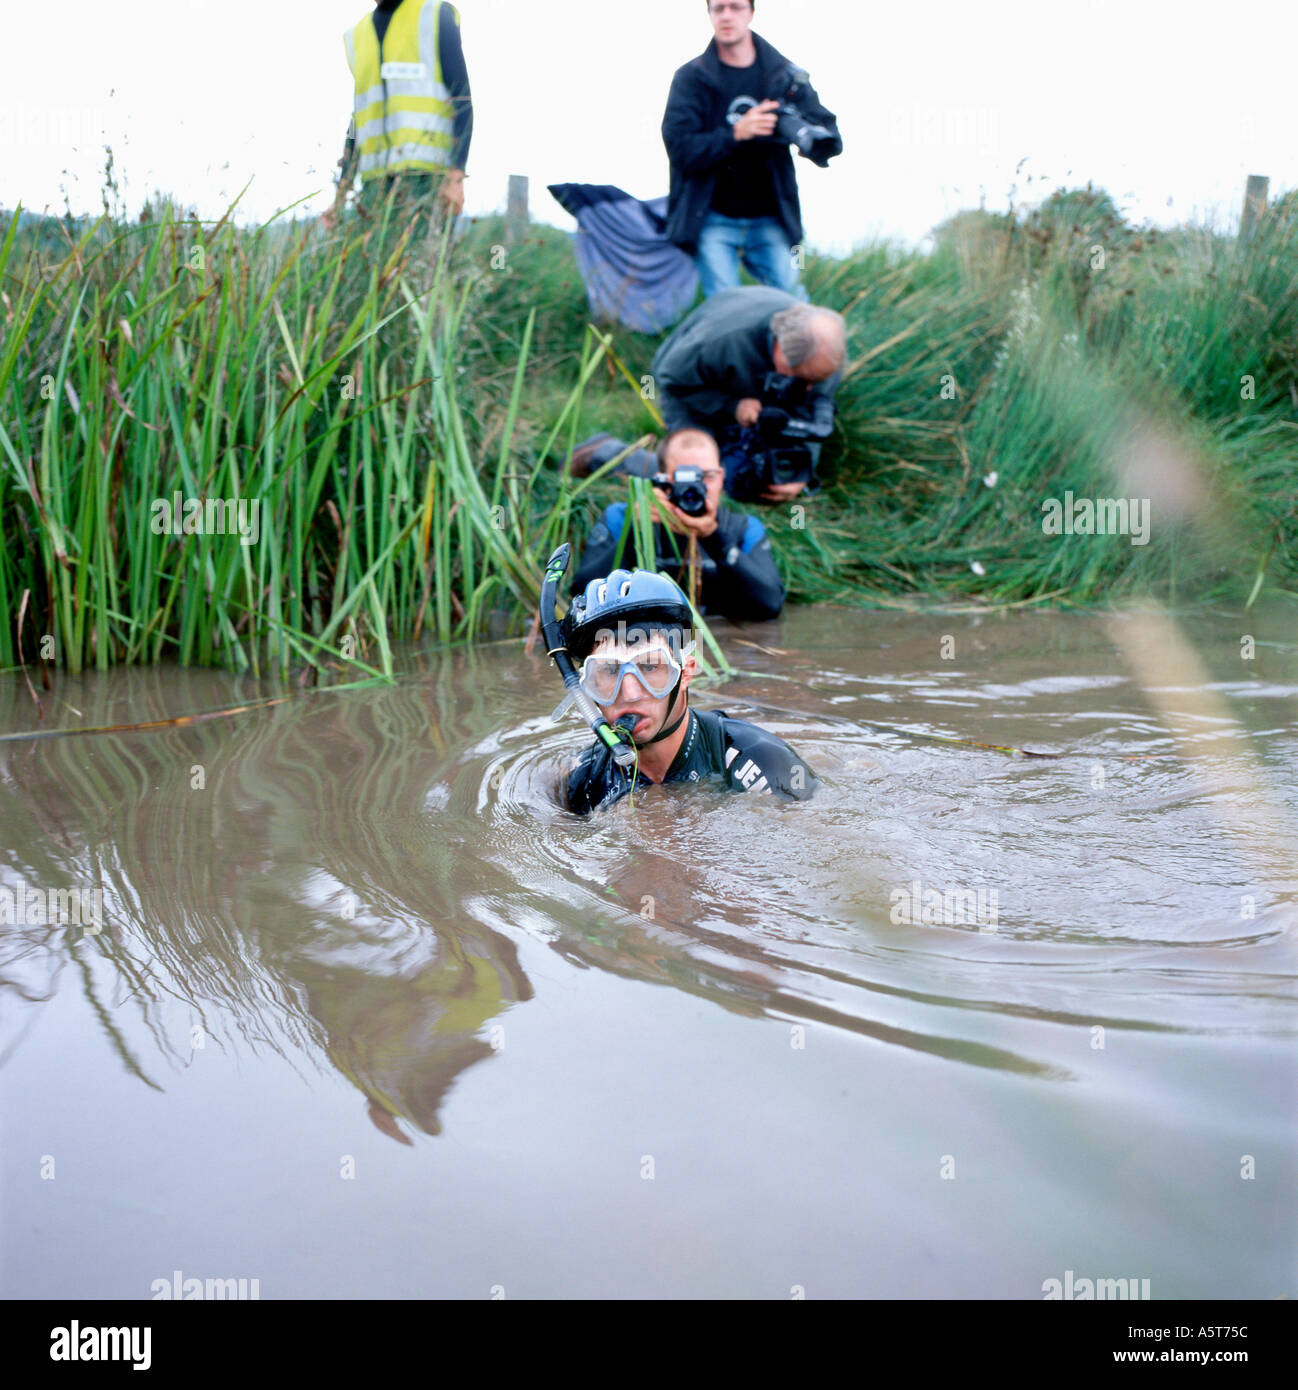 Man emerging from bog at bog snorkelling mountain bike competititon Llanwrtyd Wells Powys Wales UK Stock Photo